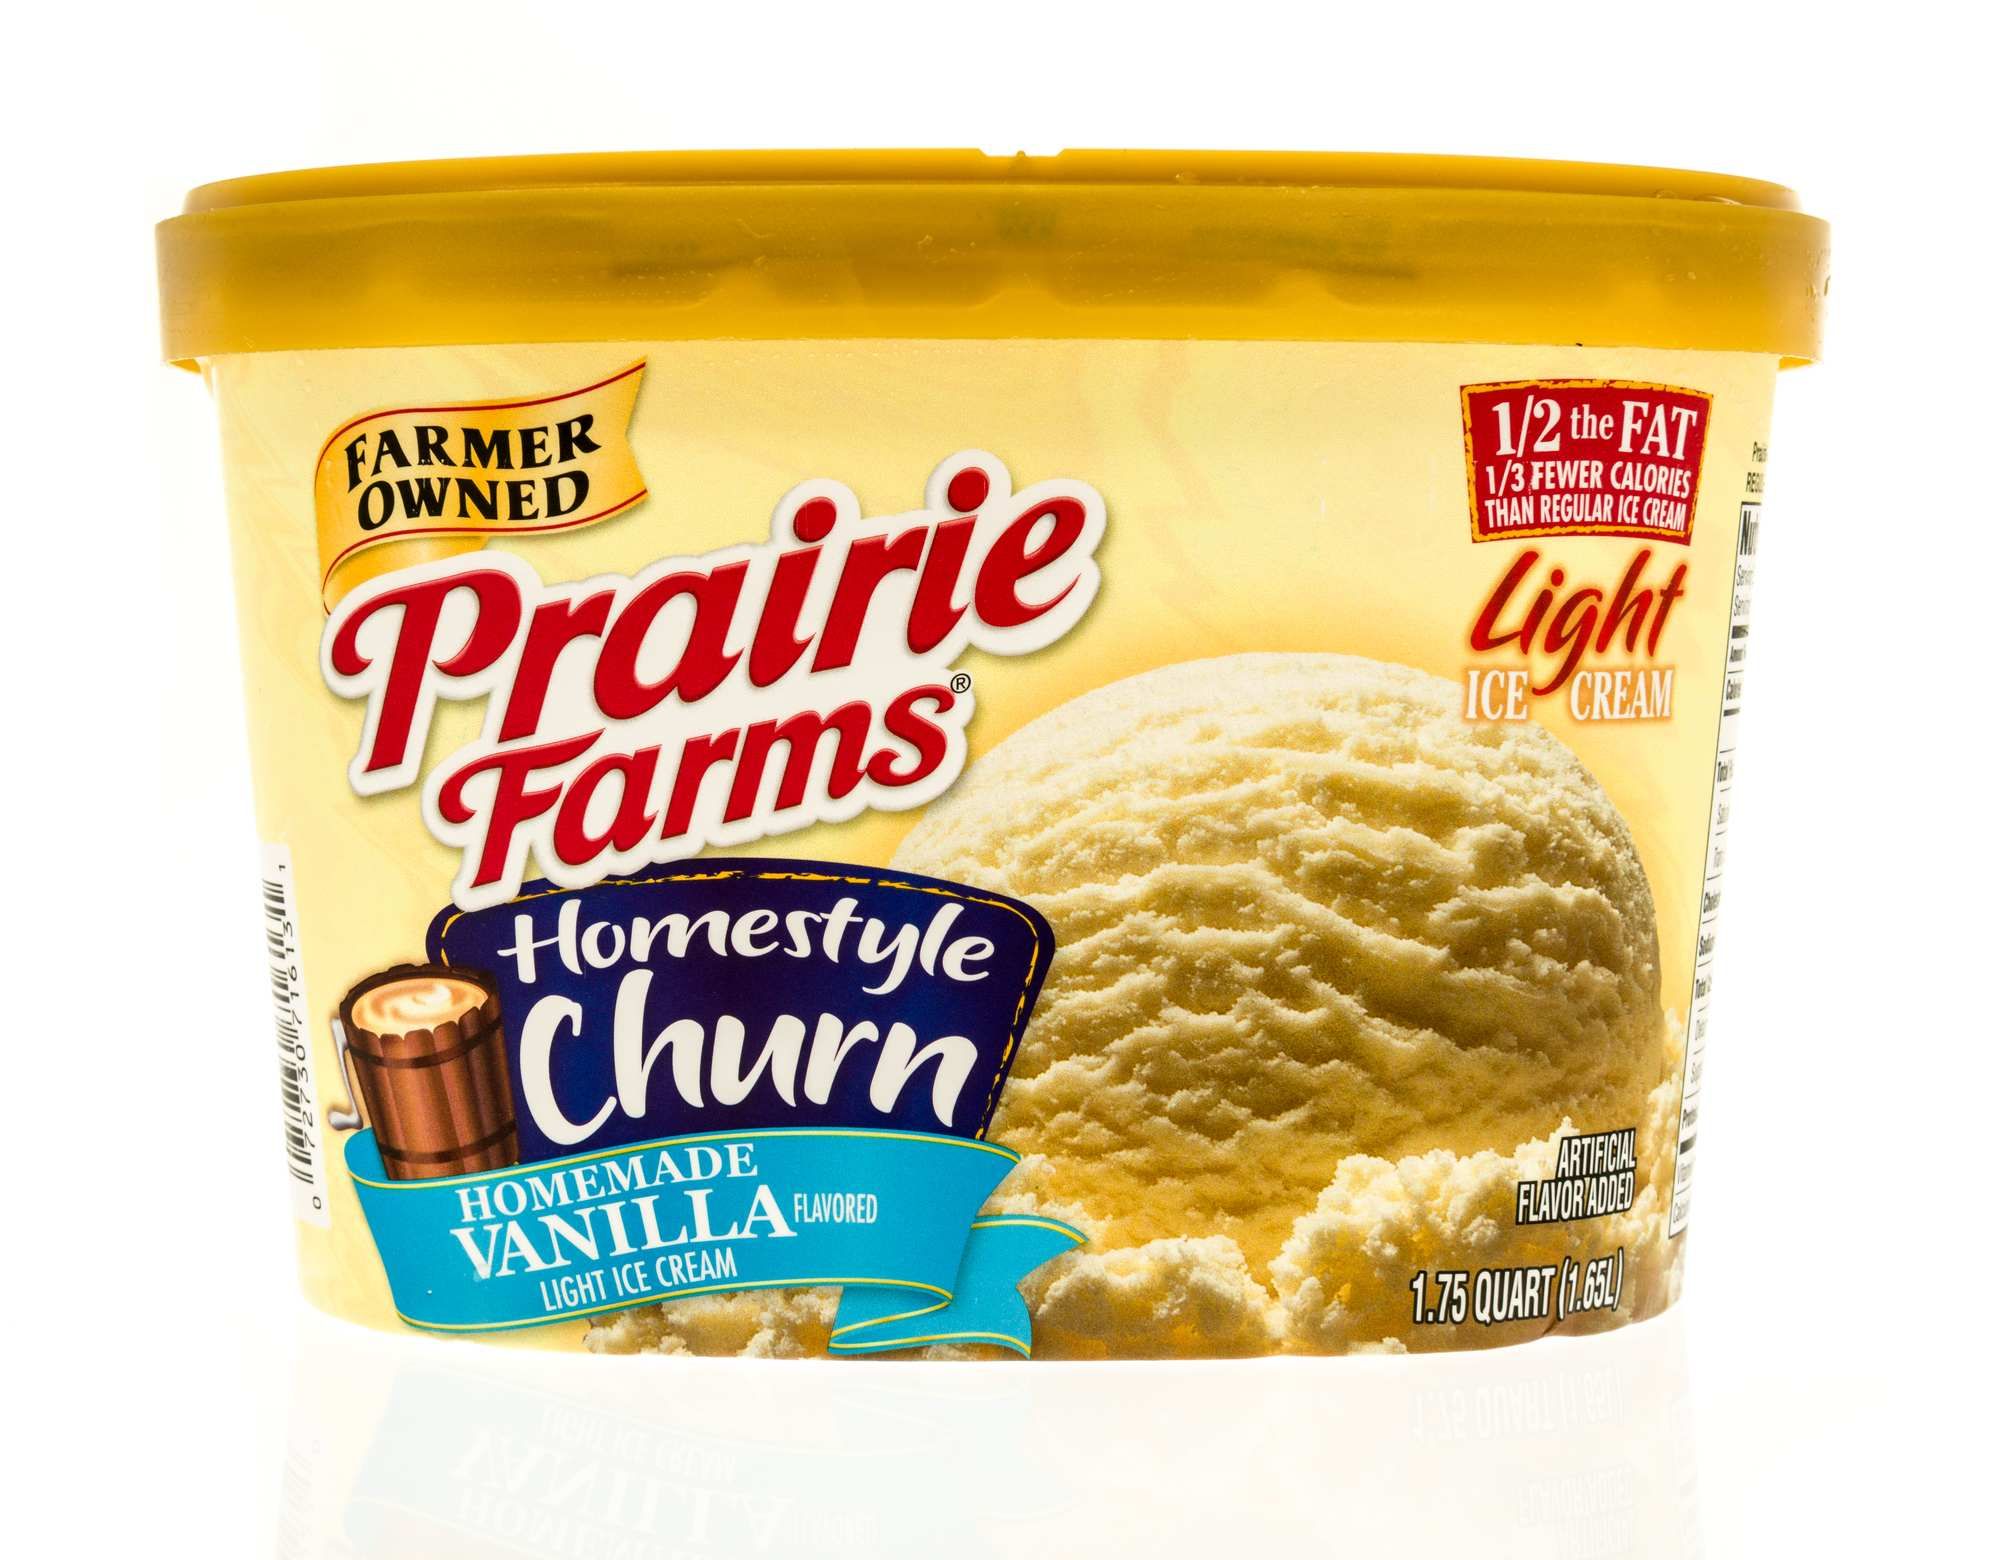 Prairie Farms vanilla ice cream is mislabeled, a class action lawsuit claims.